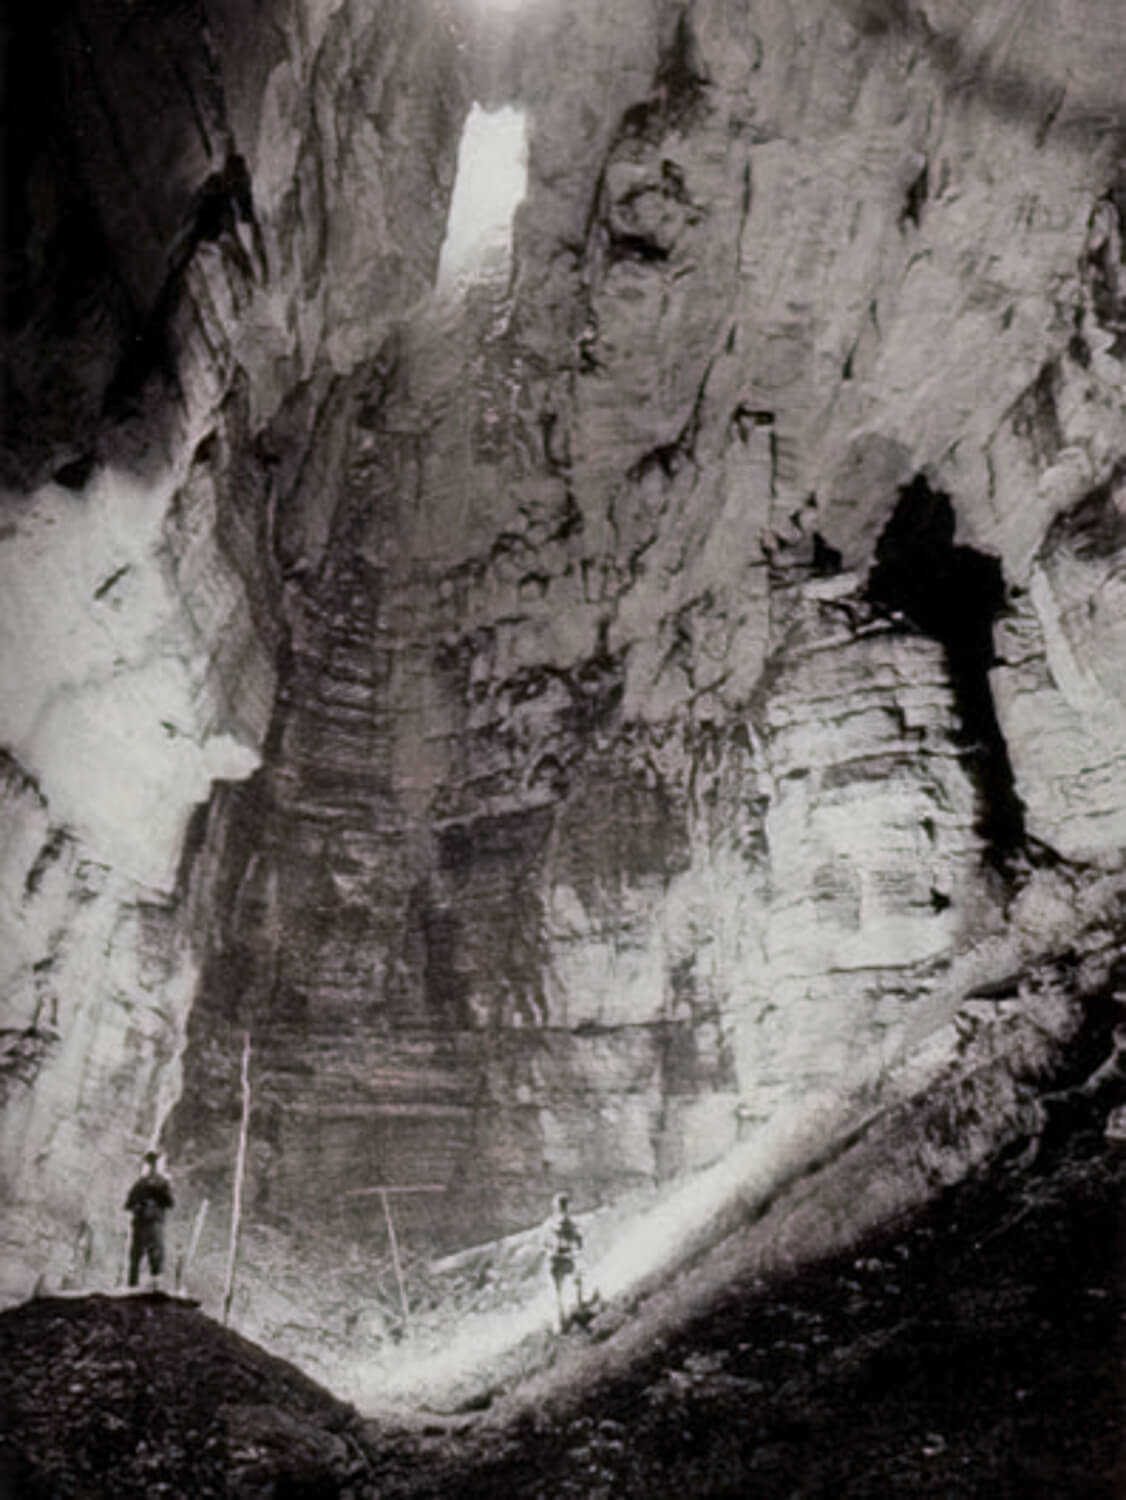 The Altar in Moricz's 1969 Expedition